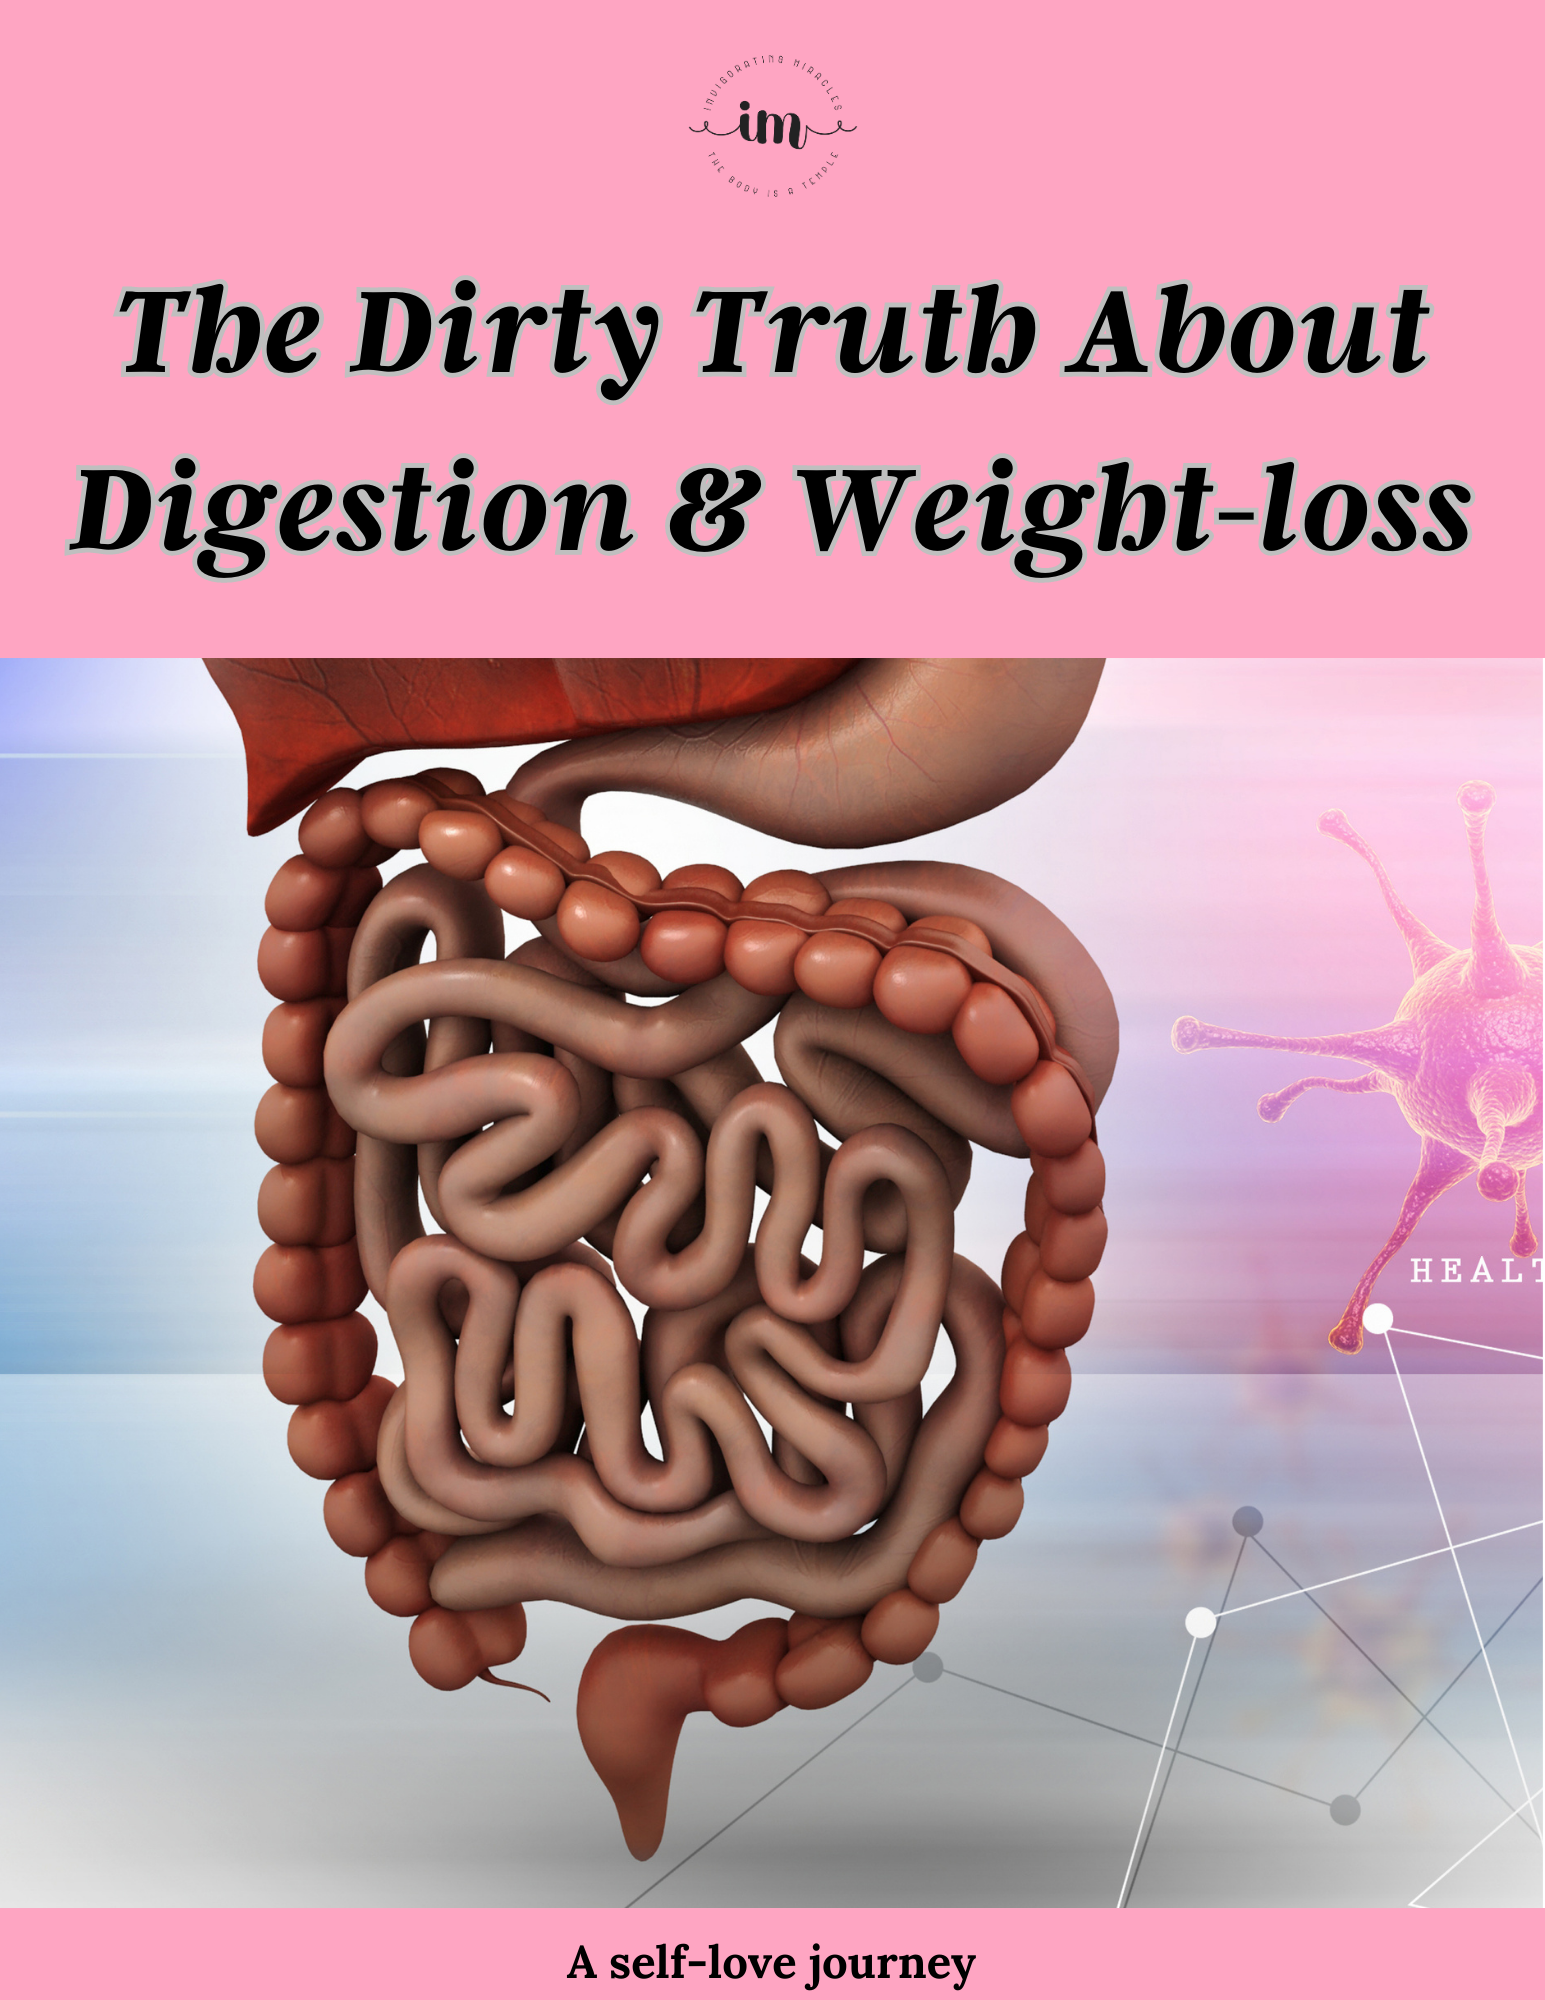 Digestion is very time consuming. This E-book was written by Shamara Daniels natural health consultant for women. A self-love journey.